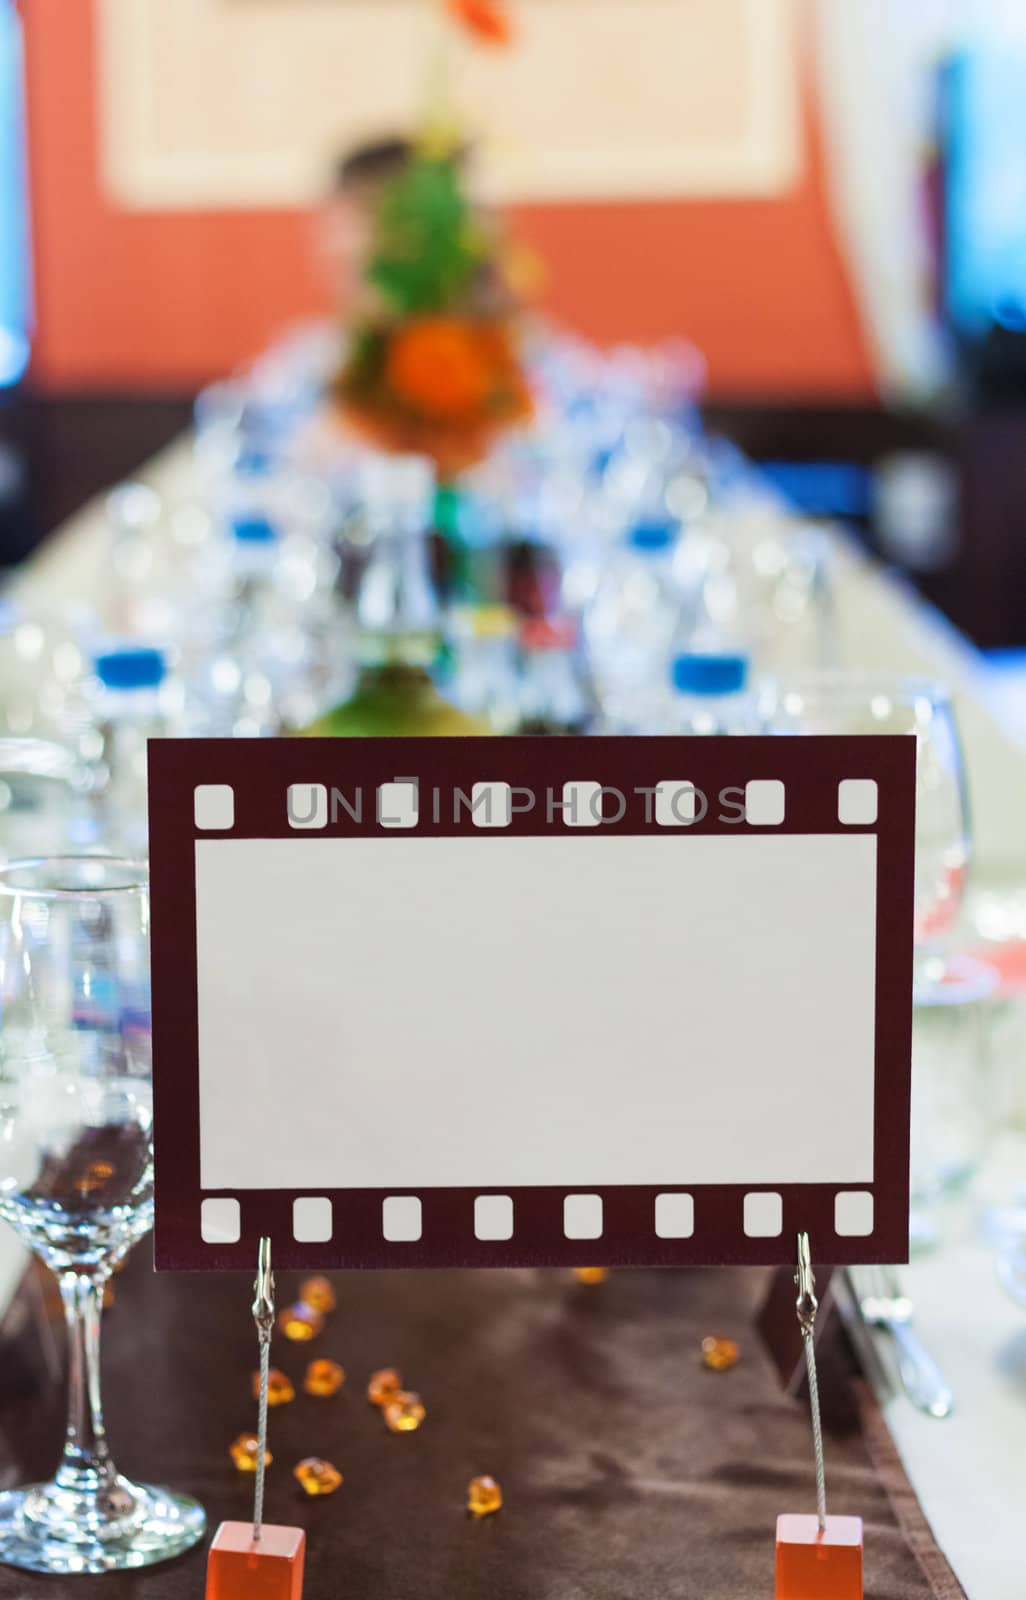 Movie film sign for an official dinner table by Lamarinx